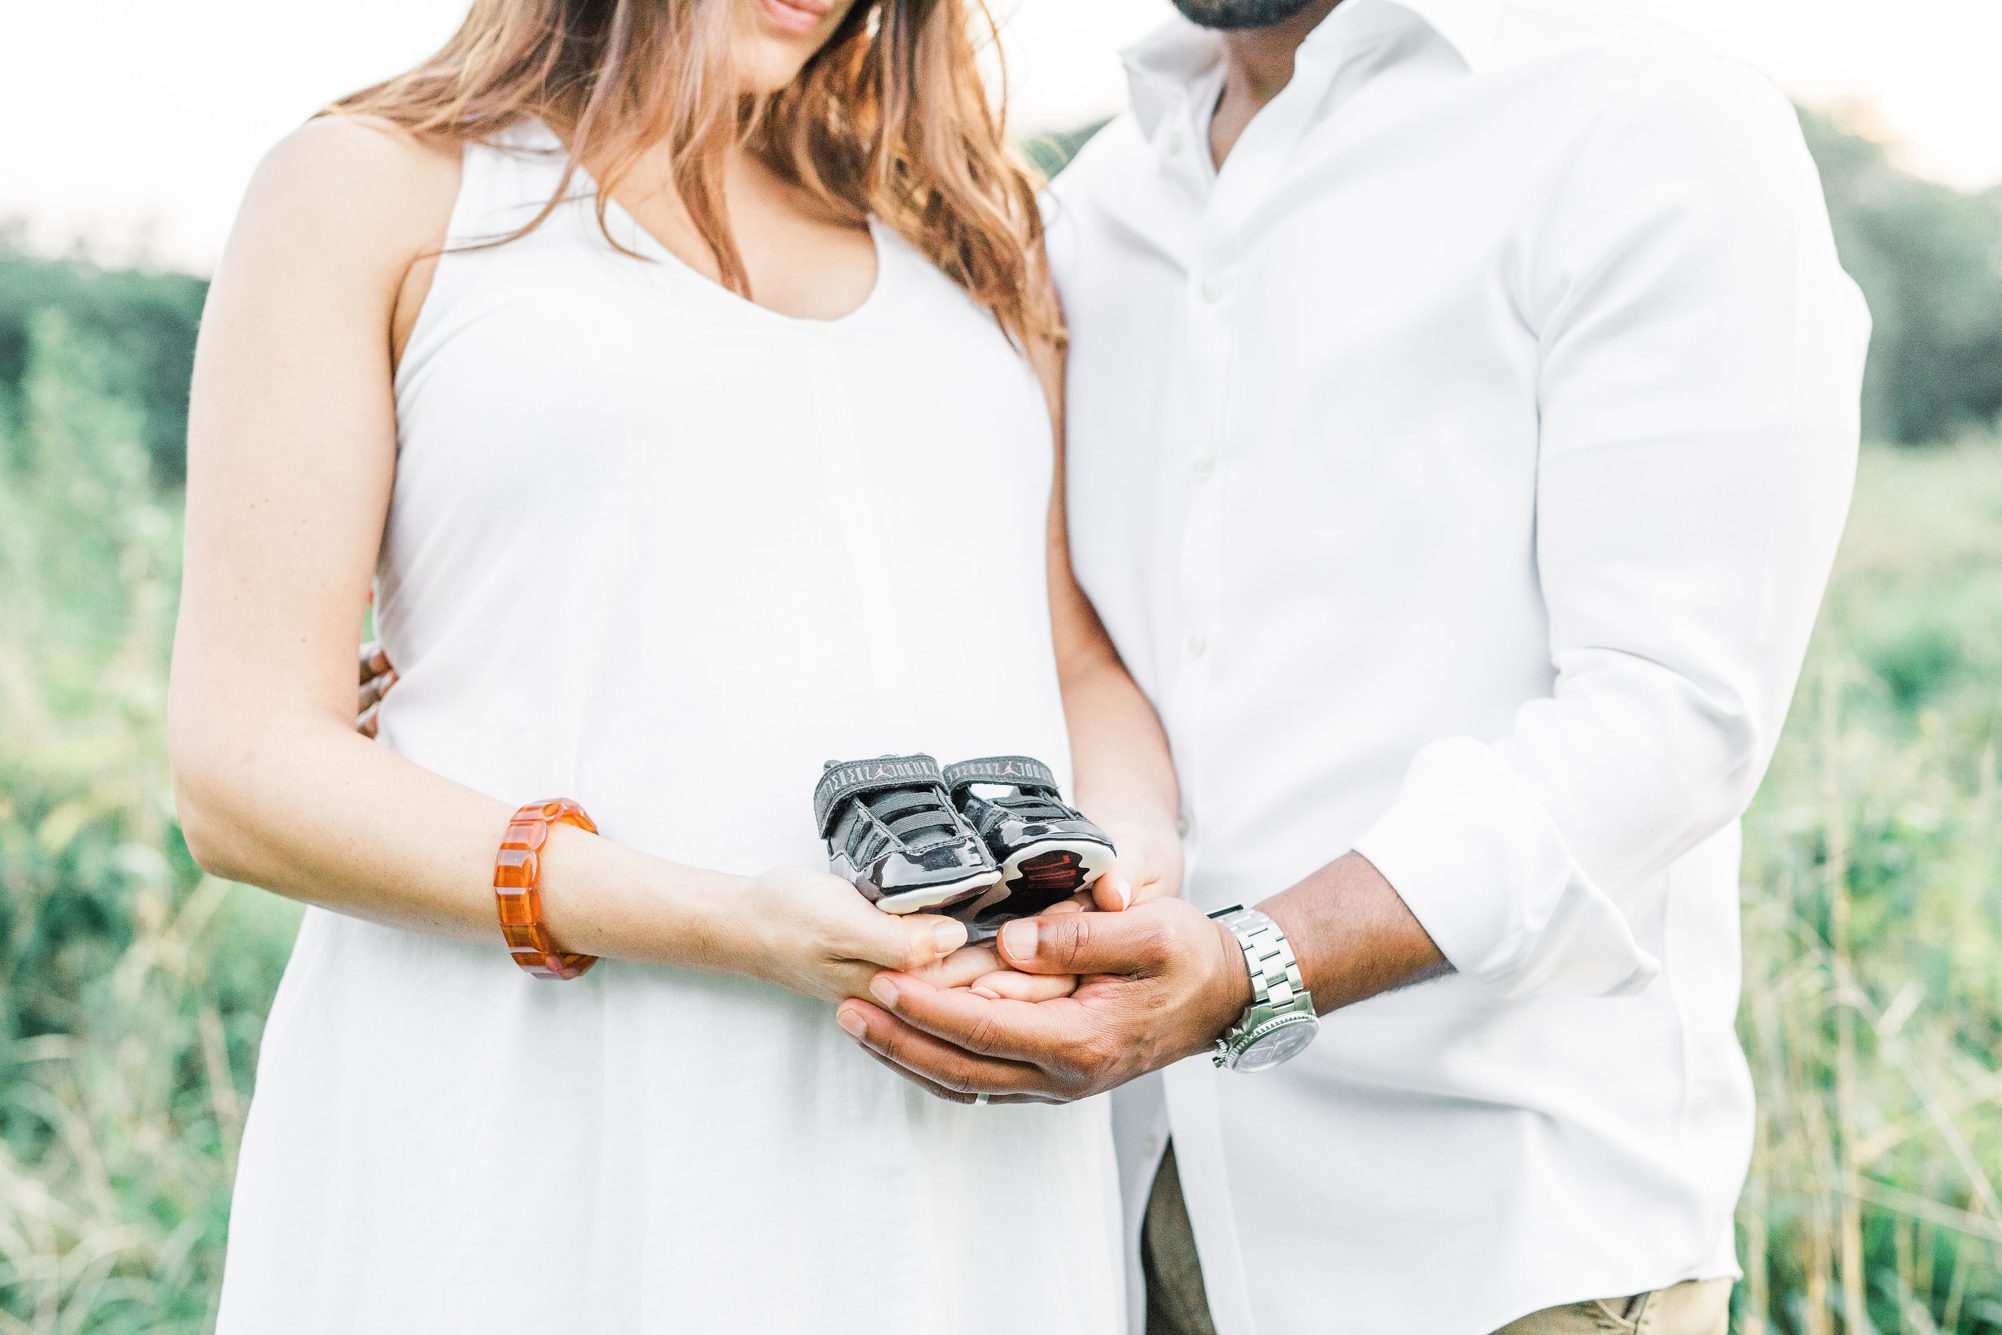 Parents holding infant shoes during field maternity session. Photo by Washington DC photographer, LRG Portraits